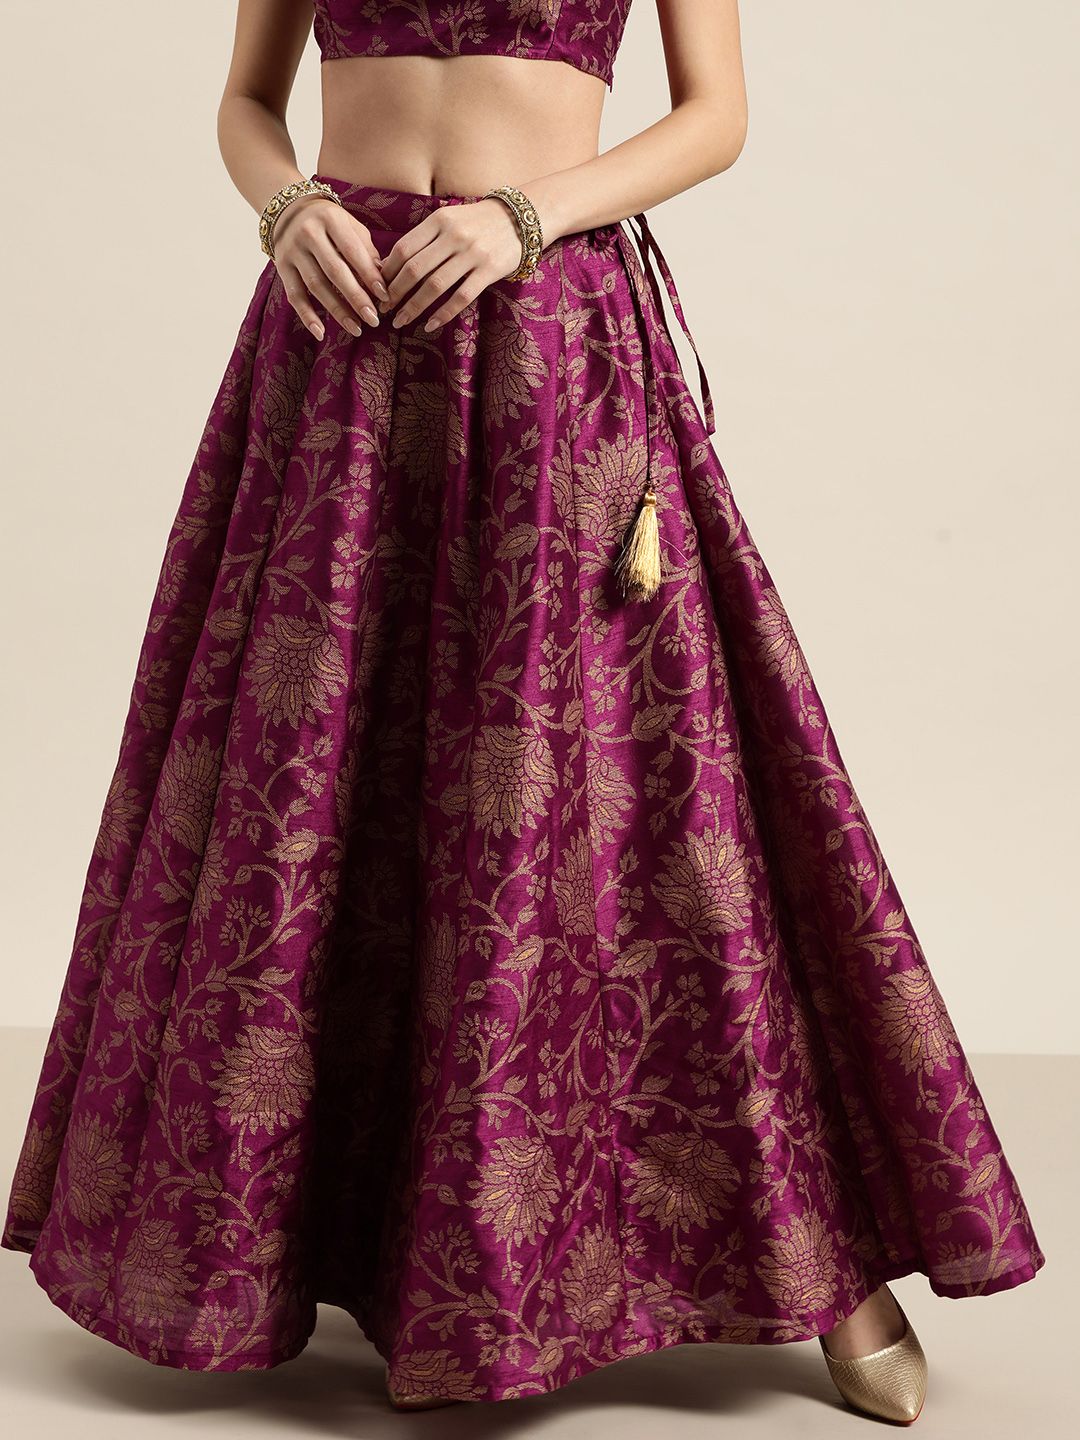 Shae by SASSAFRAS Charming Purple Floral Jacquard Skirt Price in India